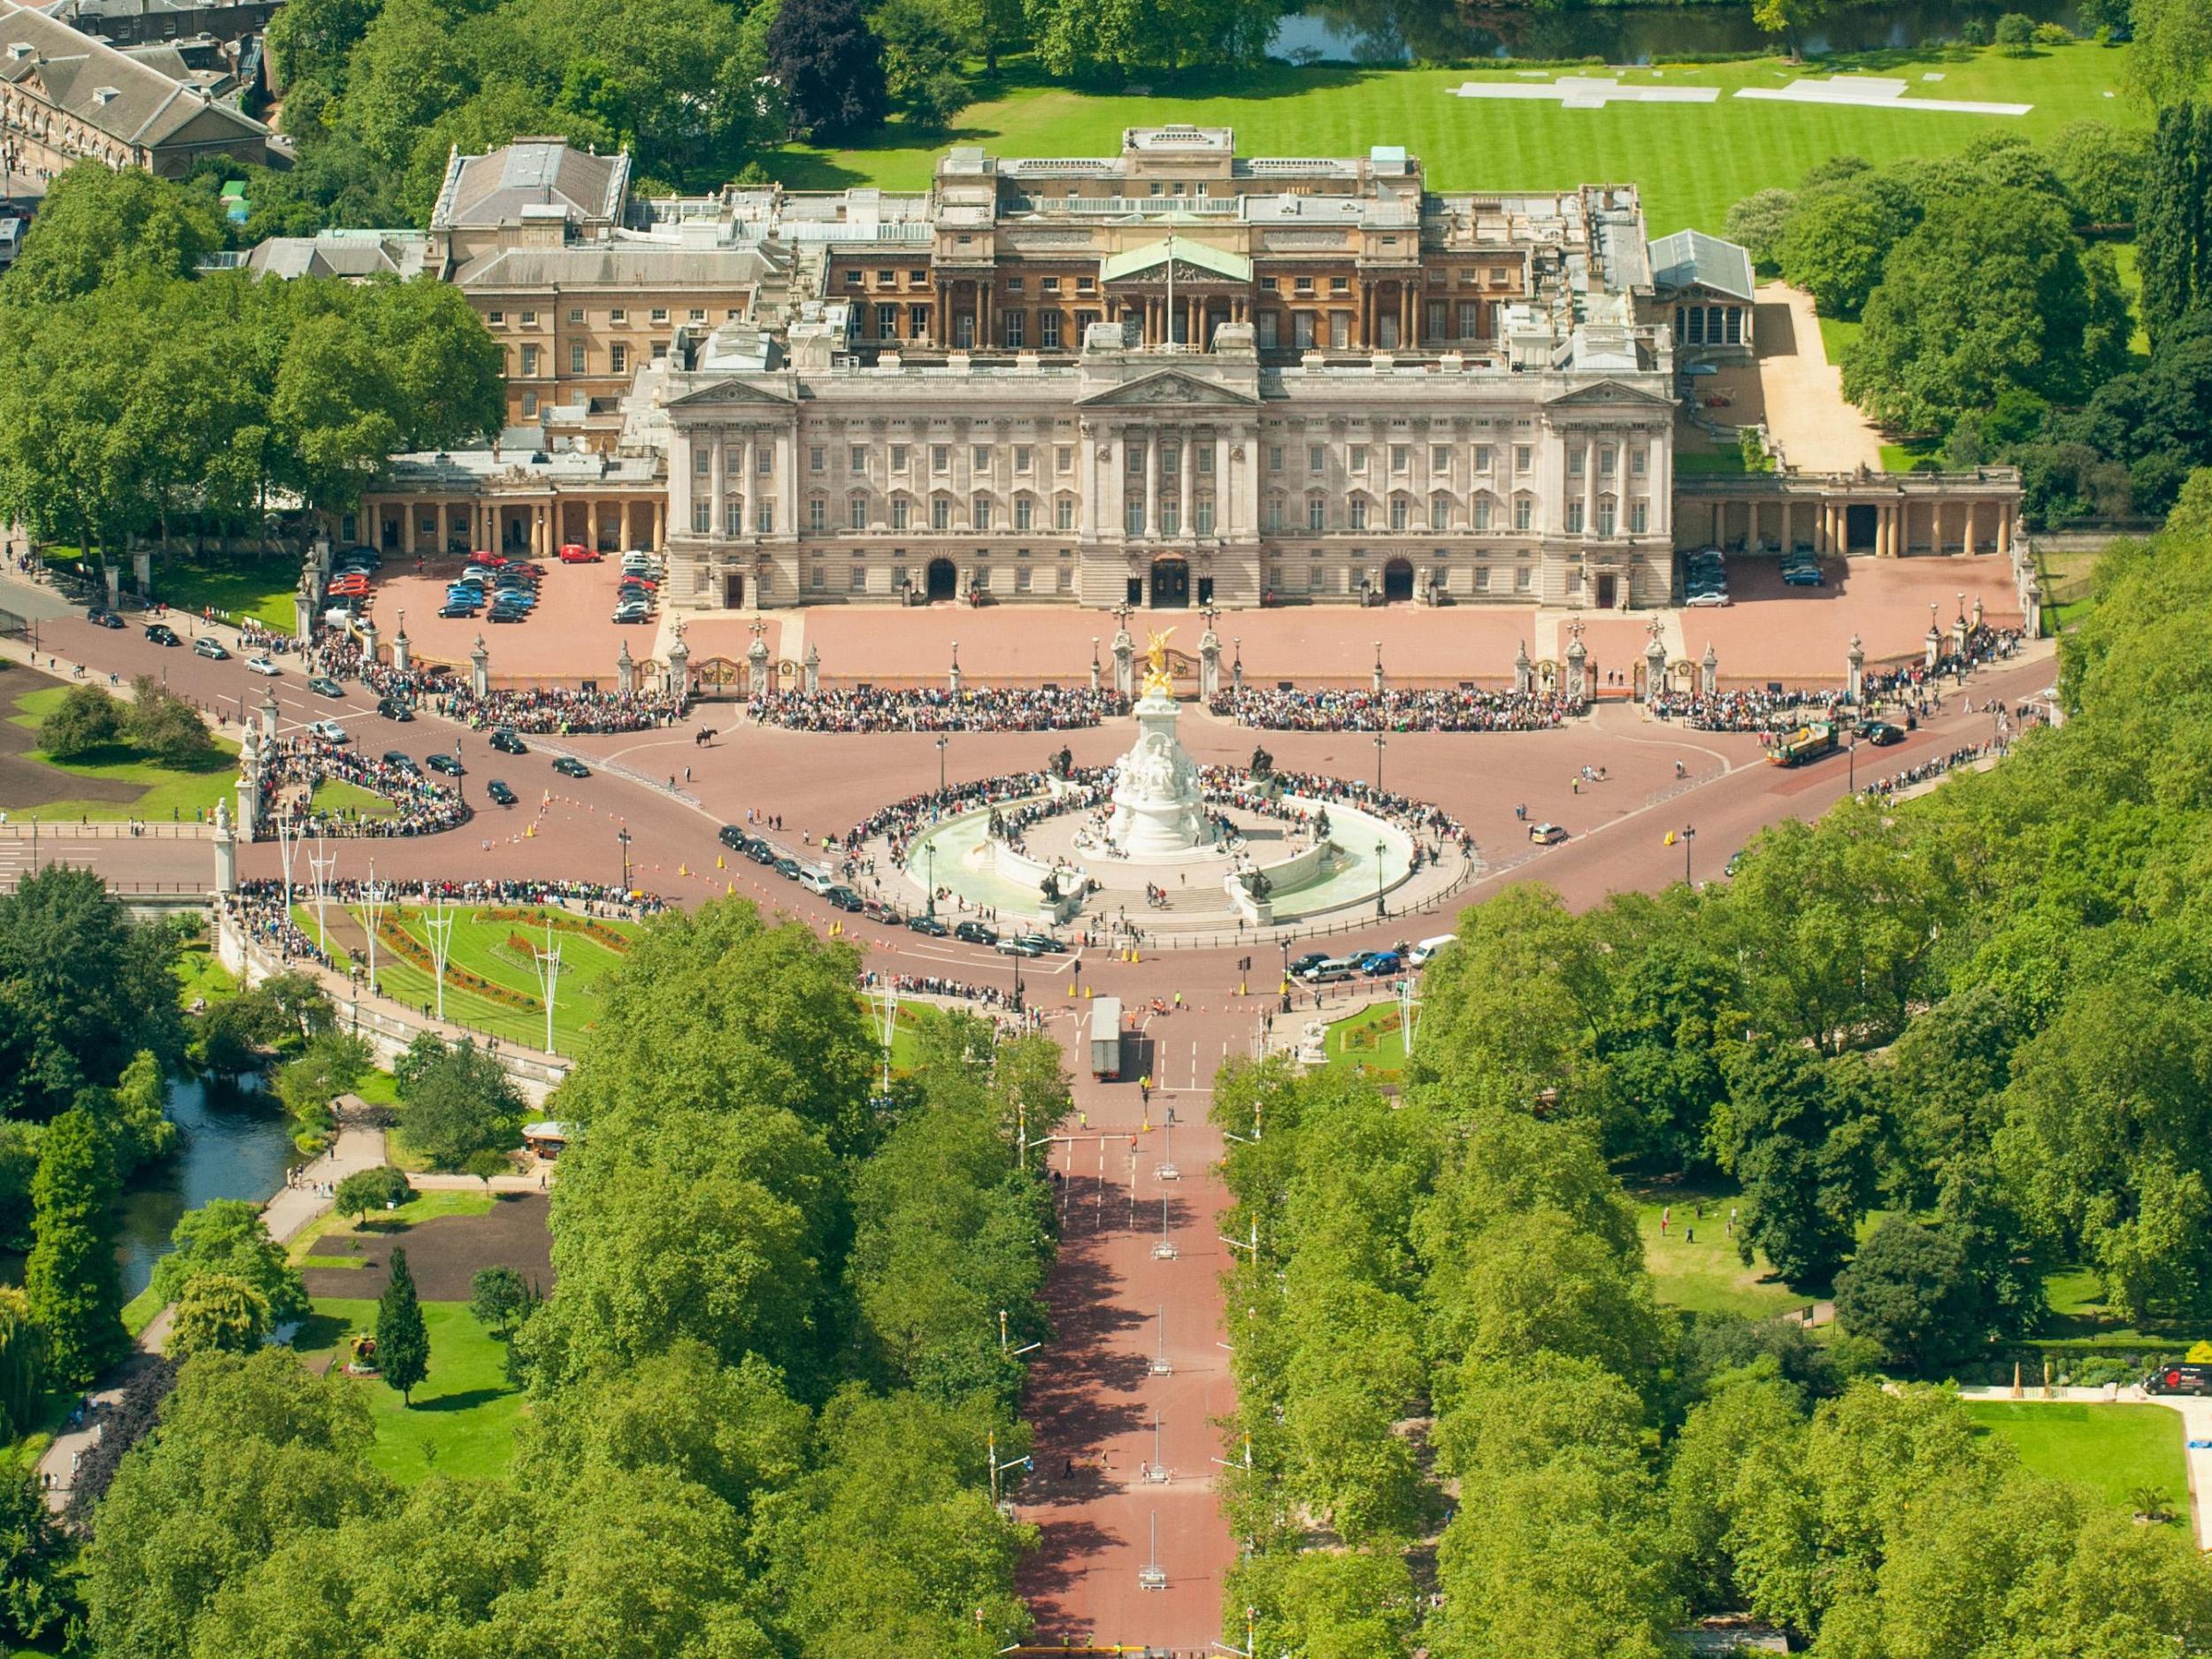 Renovations to Buckingham Palace are expected to cost as much as £369m